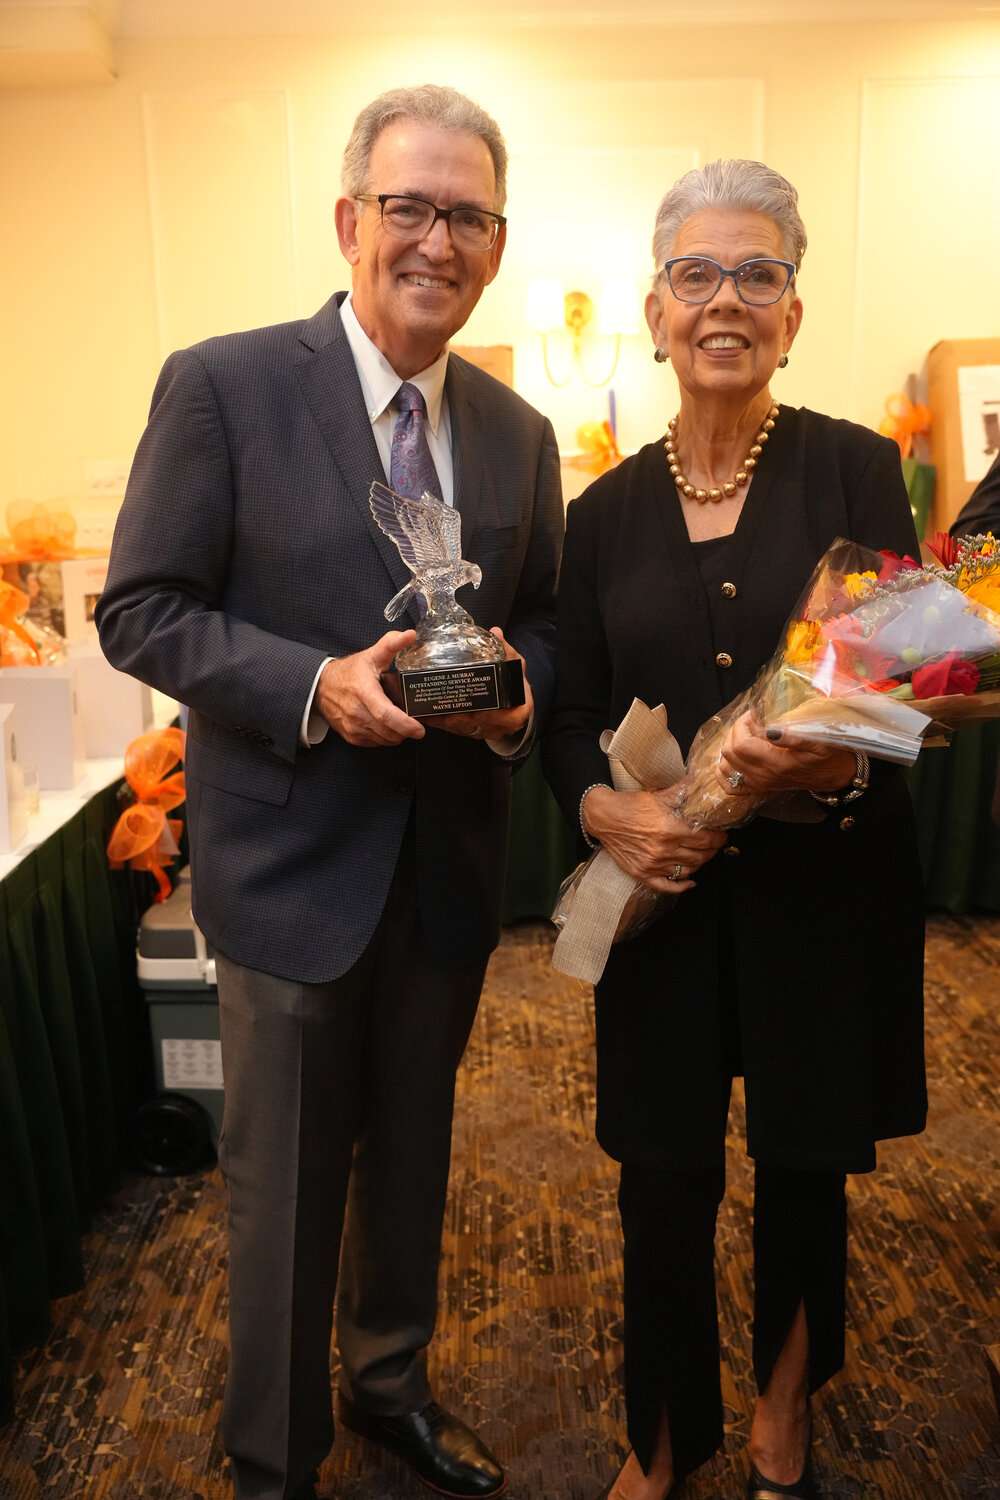 Wayne Lipton, the 2023 recipient of the Eugene J. Murray Outstanding Service Award, with his wife, Karen.